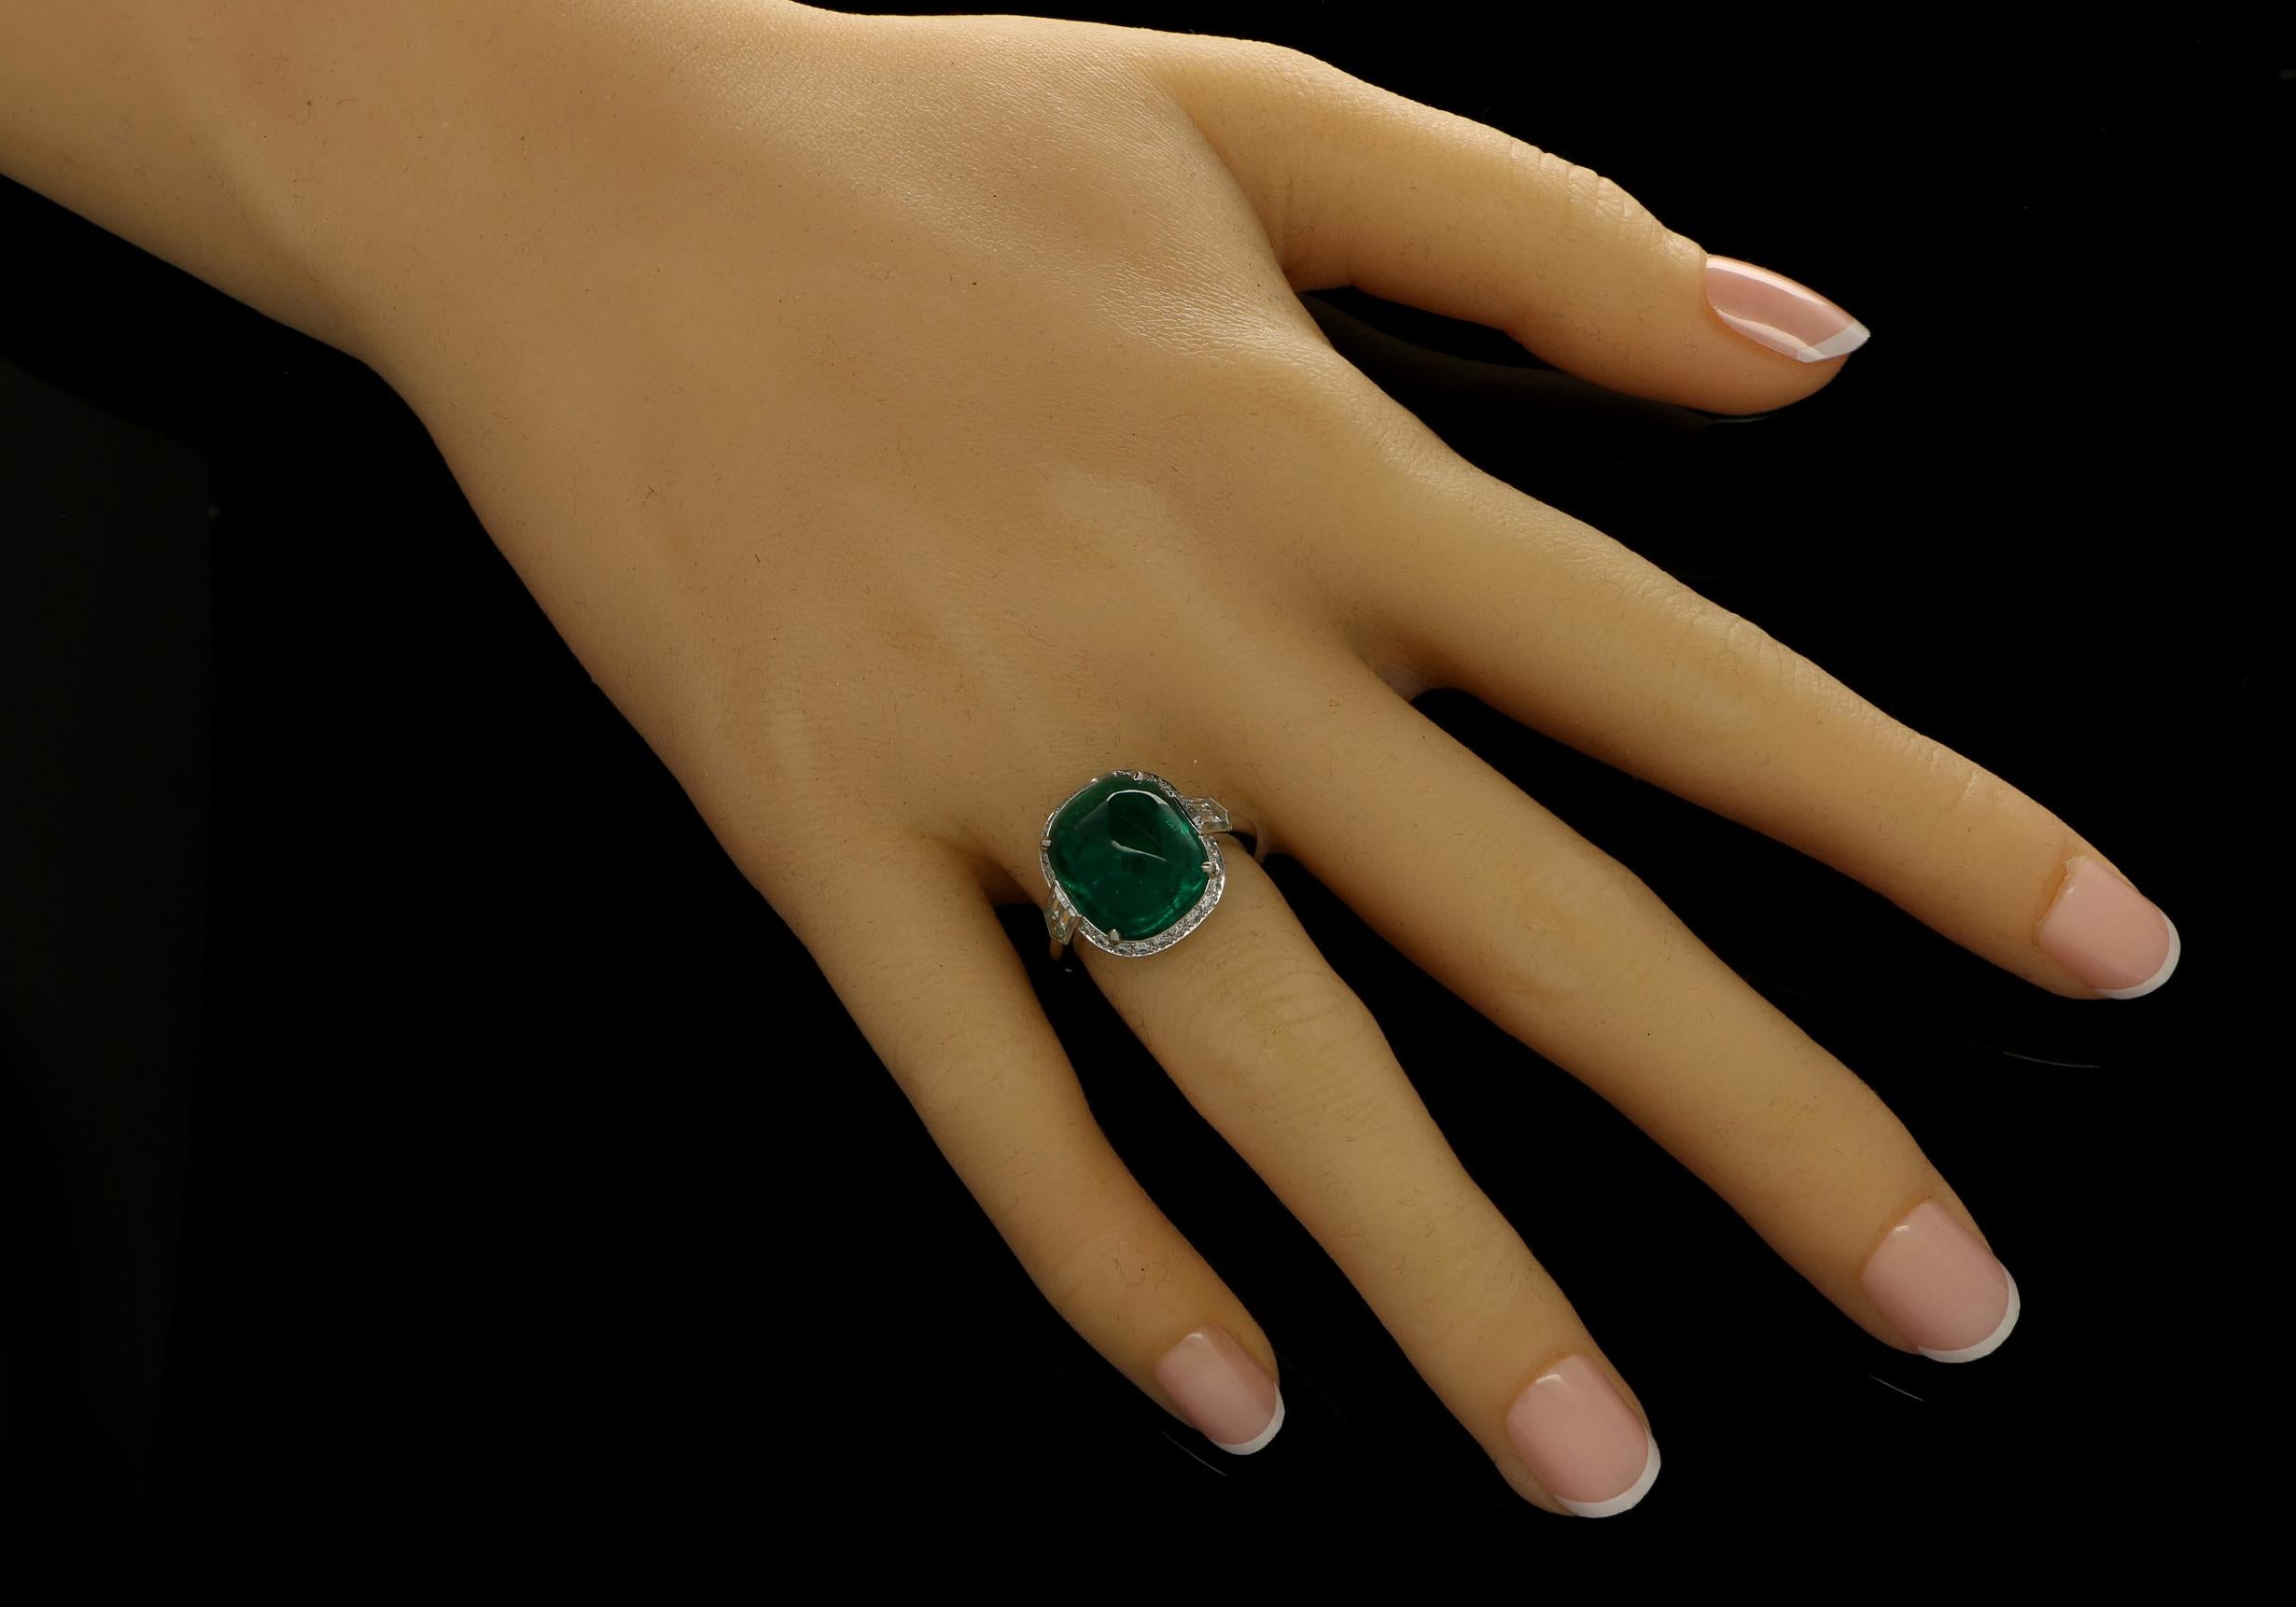 8.59ct sugar loaf cabochon Colombian emerald with AGL certificate
Pair of F+ VS+ grade bullet cut diamonds with a combined weight of 1.37cts.
Platinum with maker's signature
UK finger size L, can be adjusted to your own finger size
8.2 grams

A